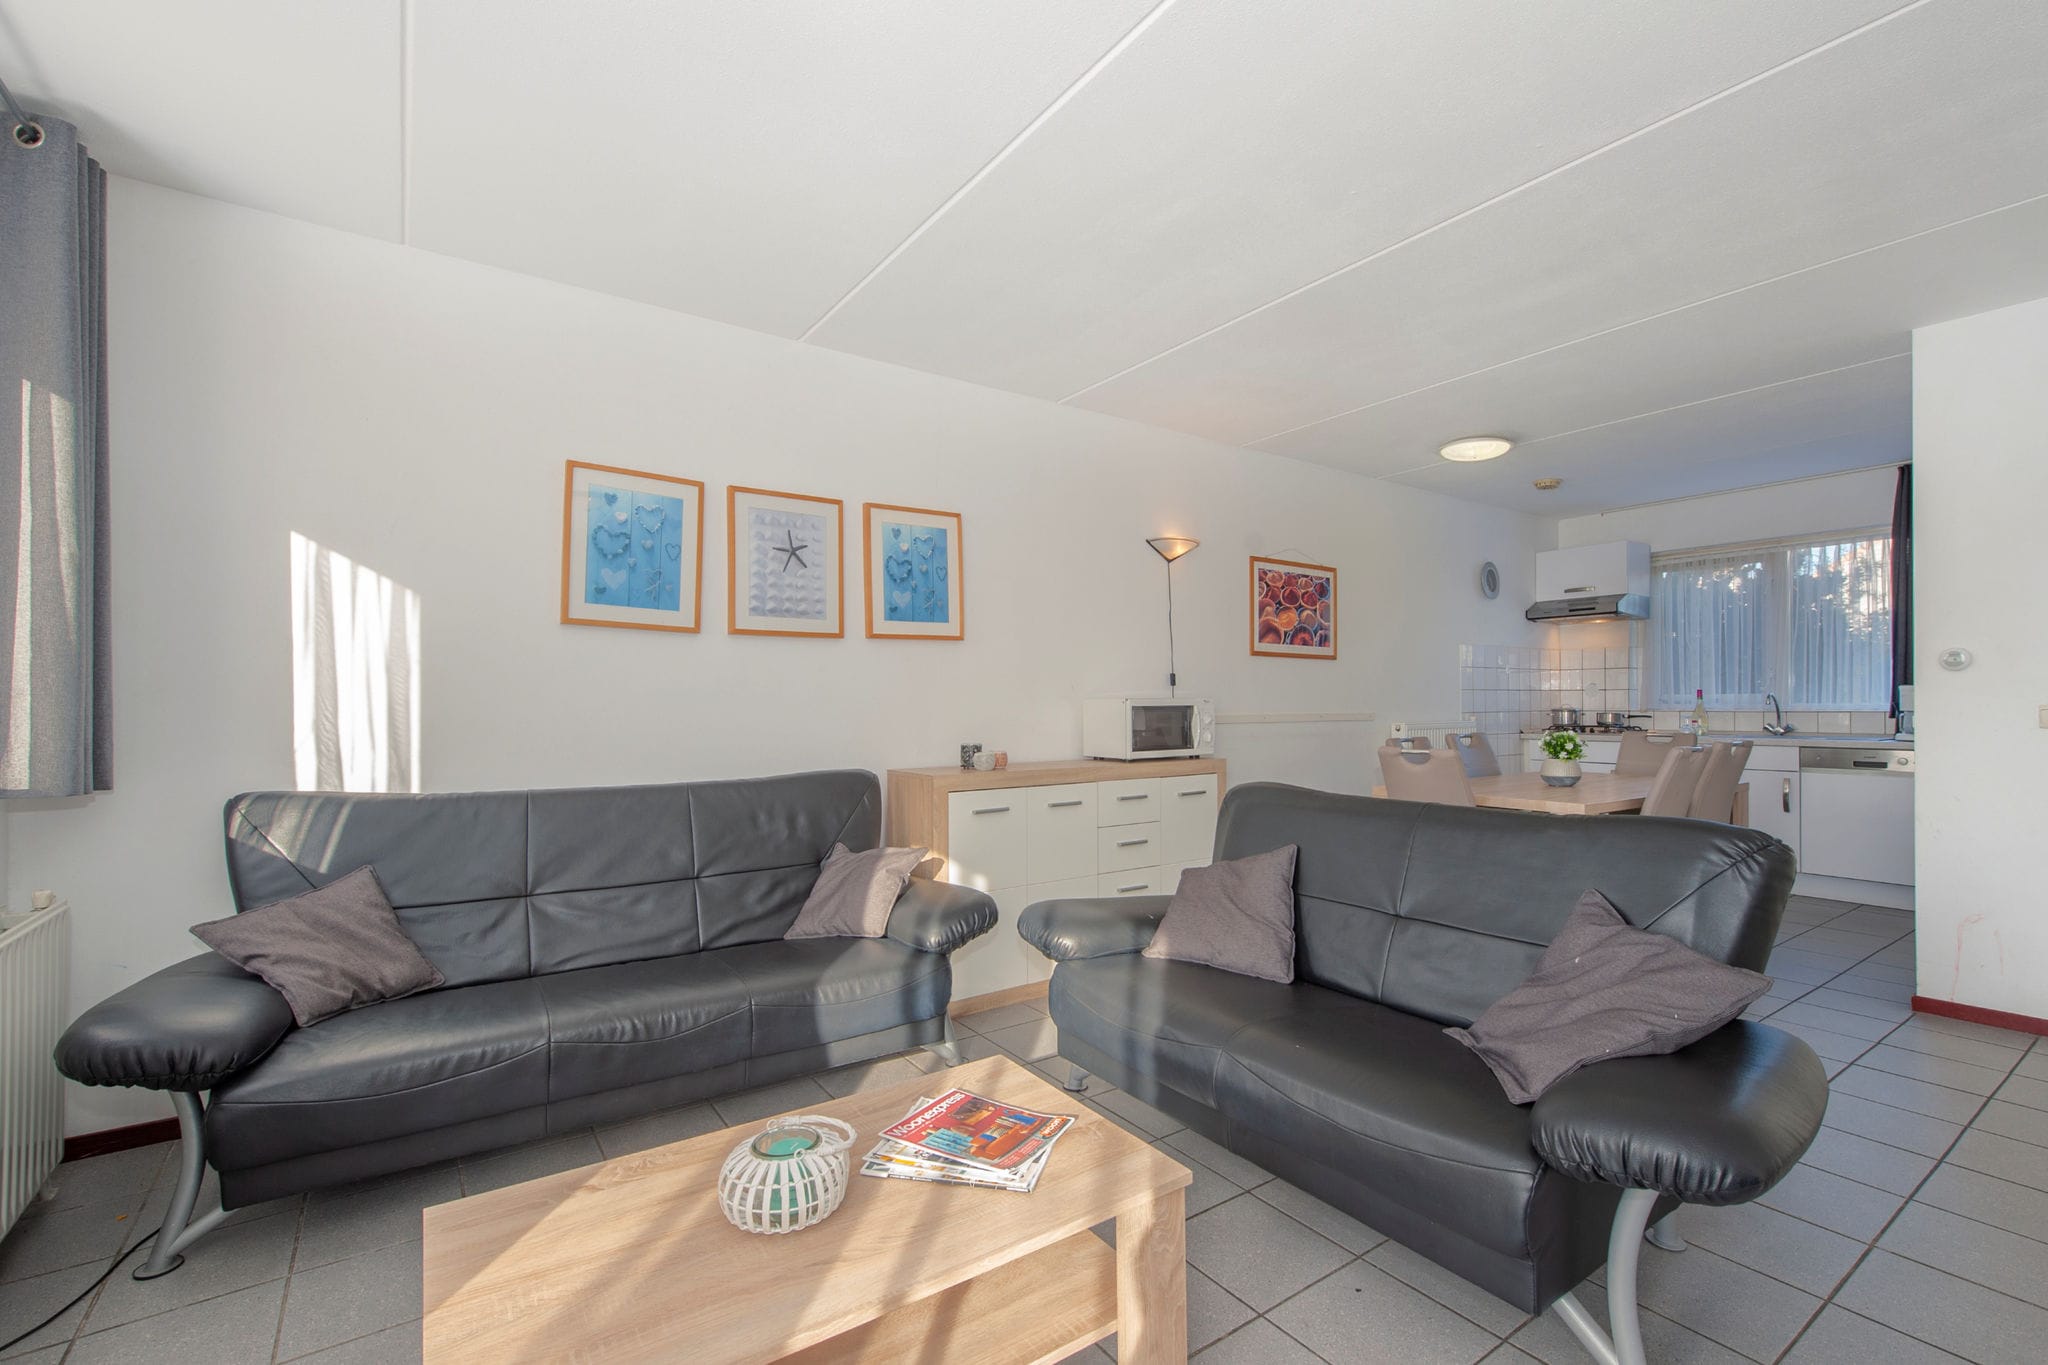 Semi-detached holiday home with WiFi, 500 m. from the beach